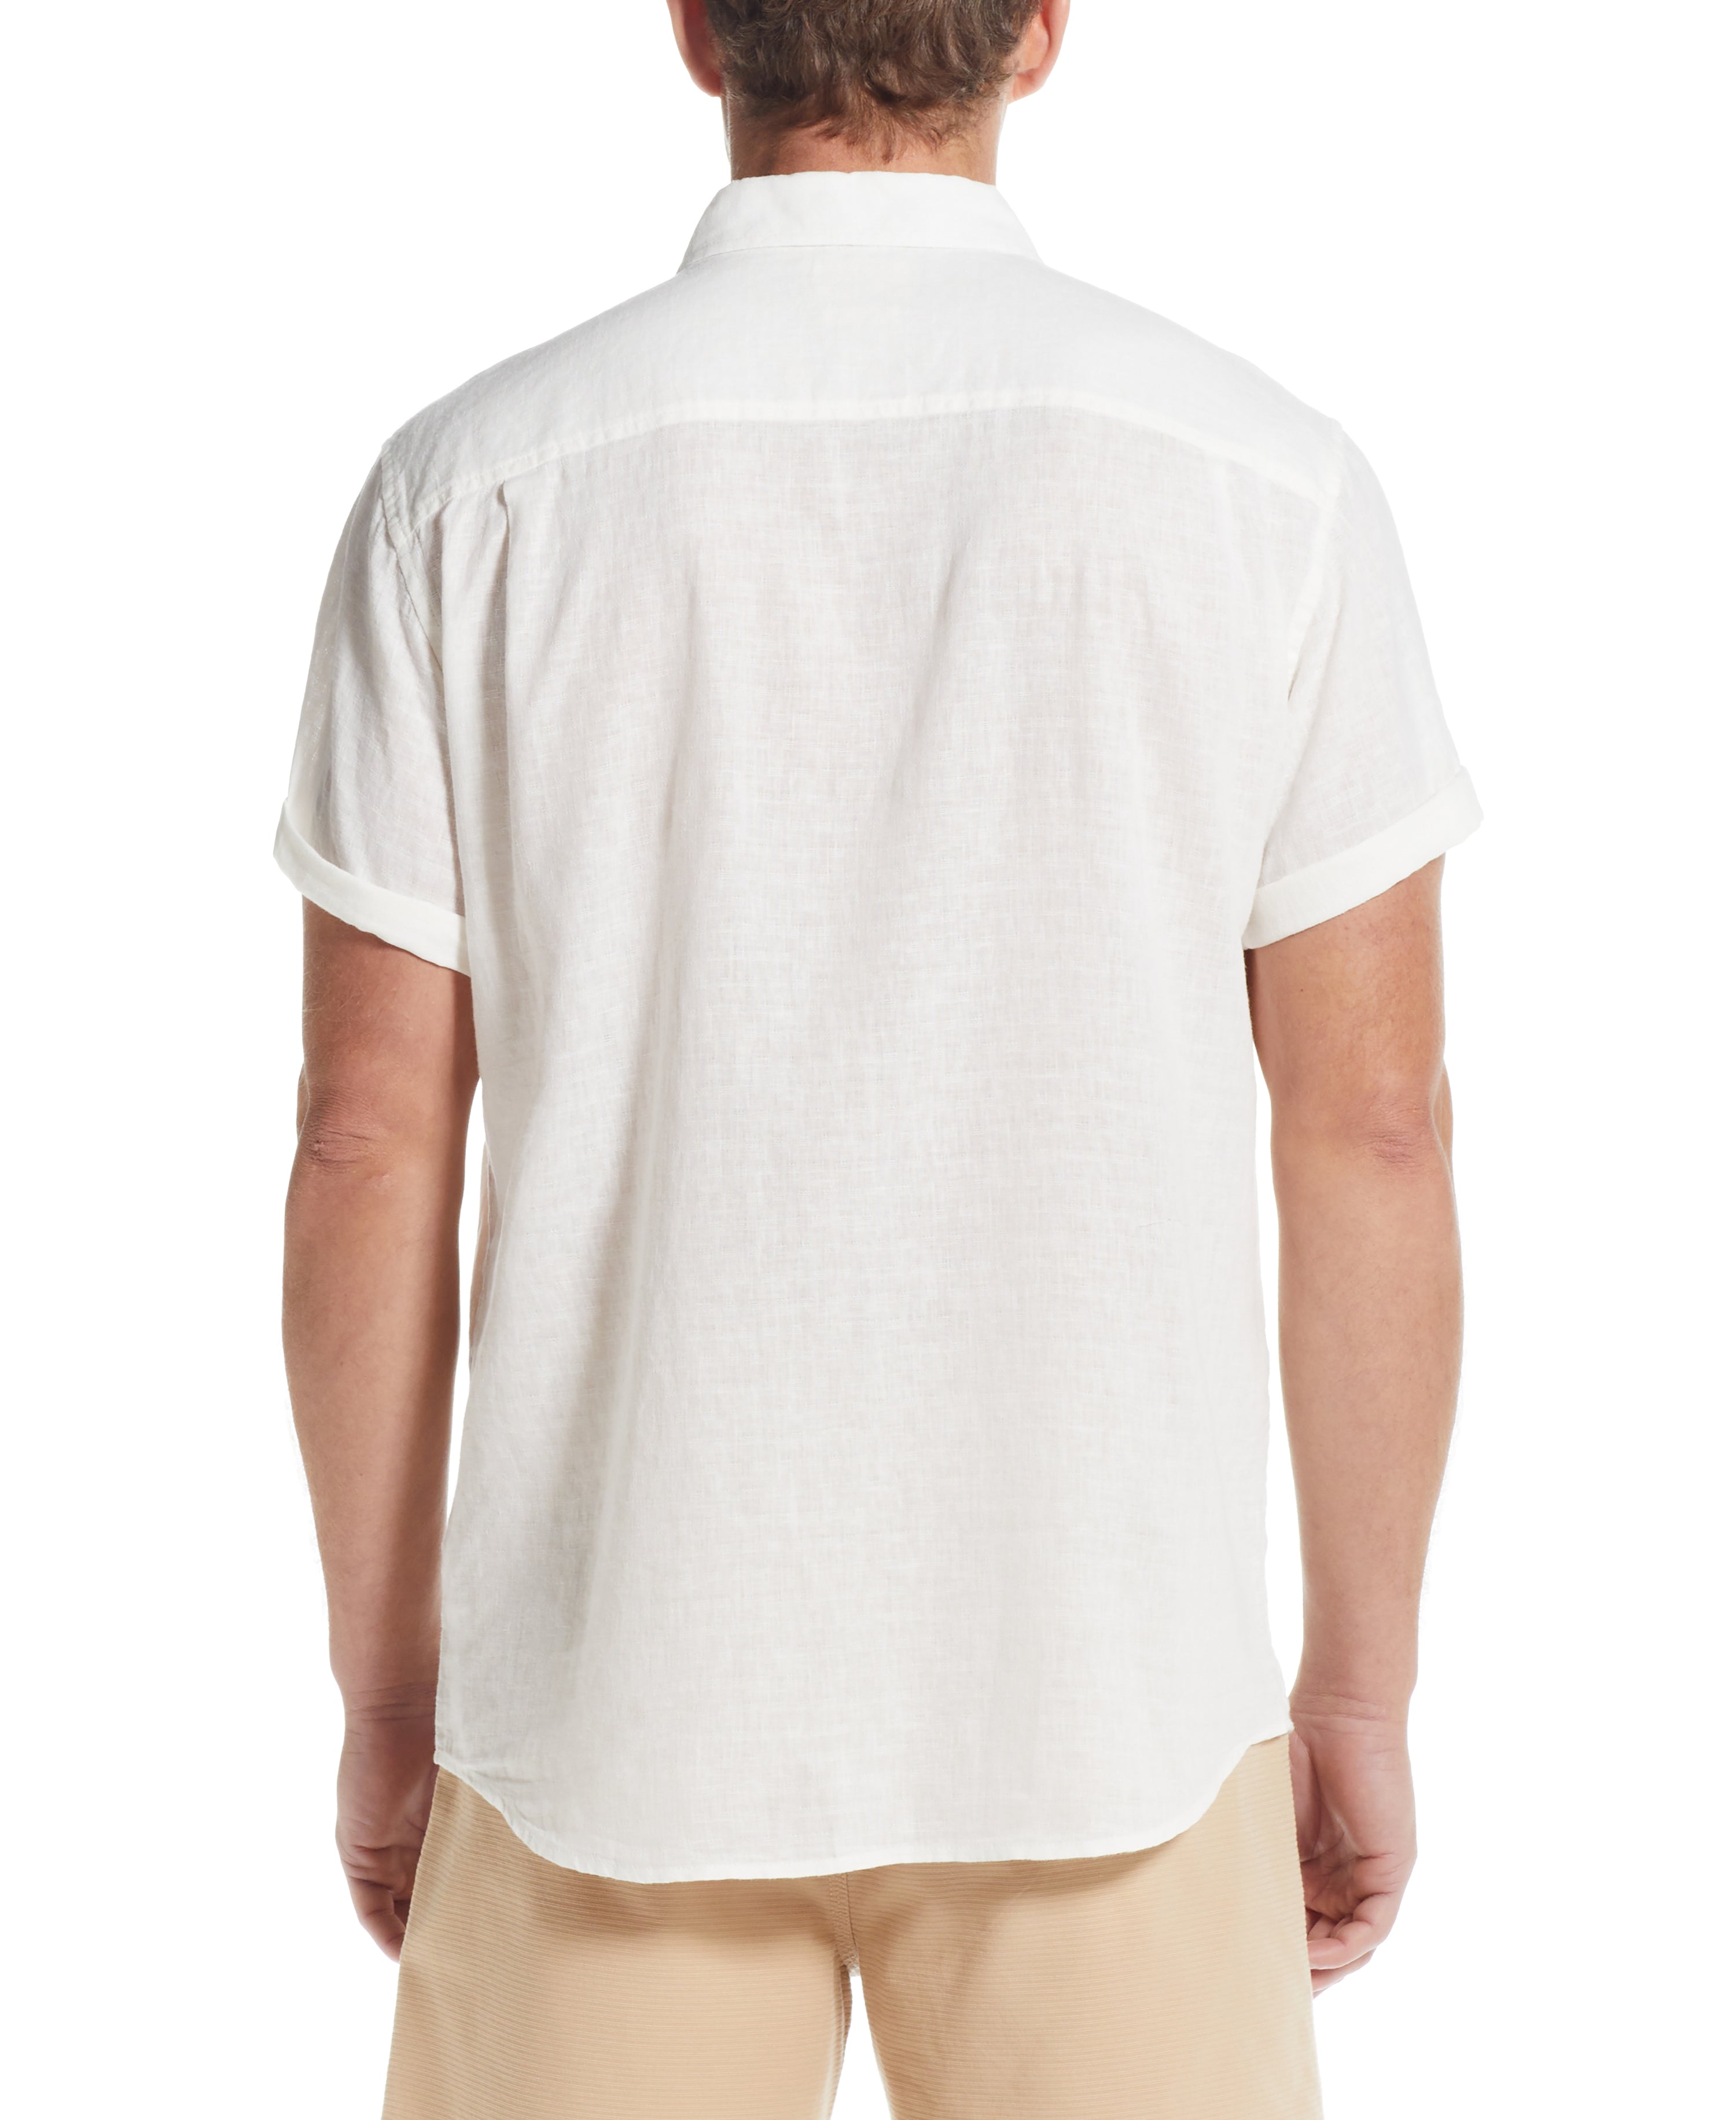 Solid Linen Cotton Shirt in White